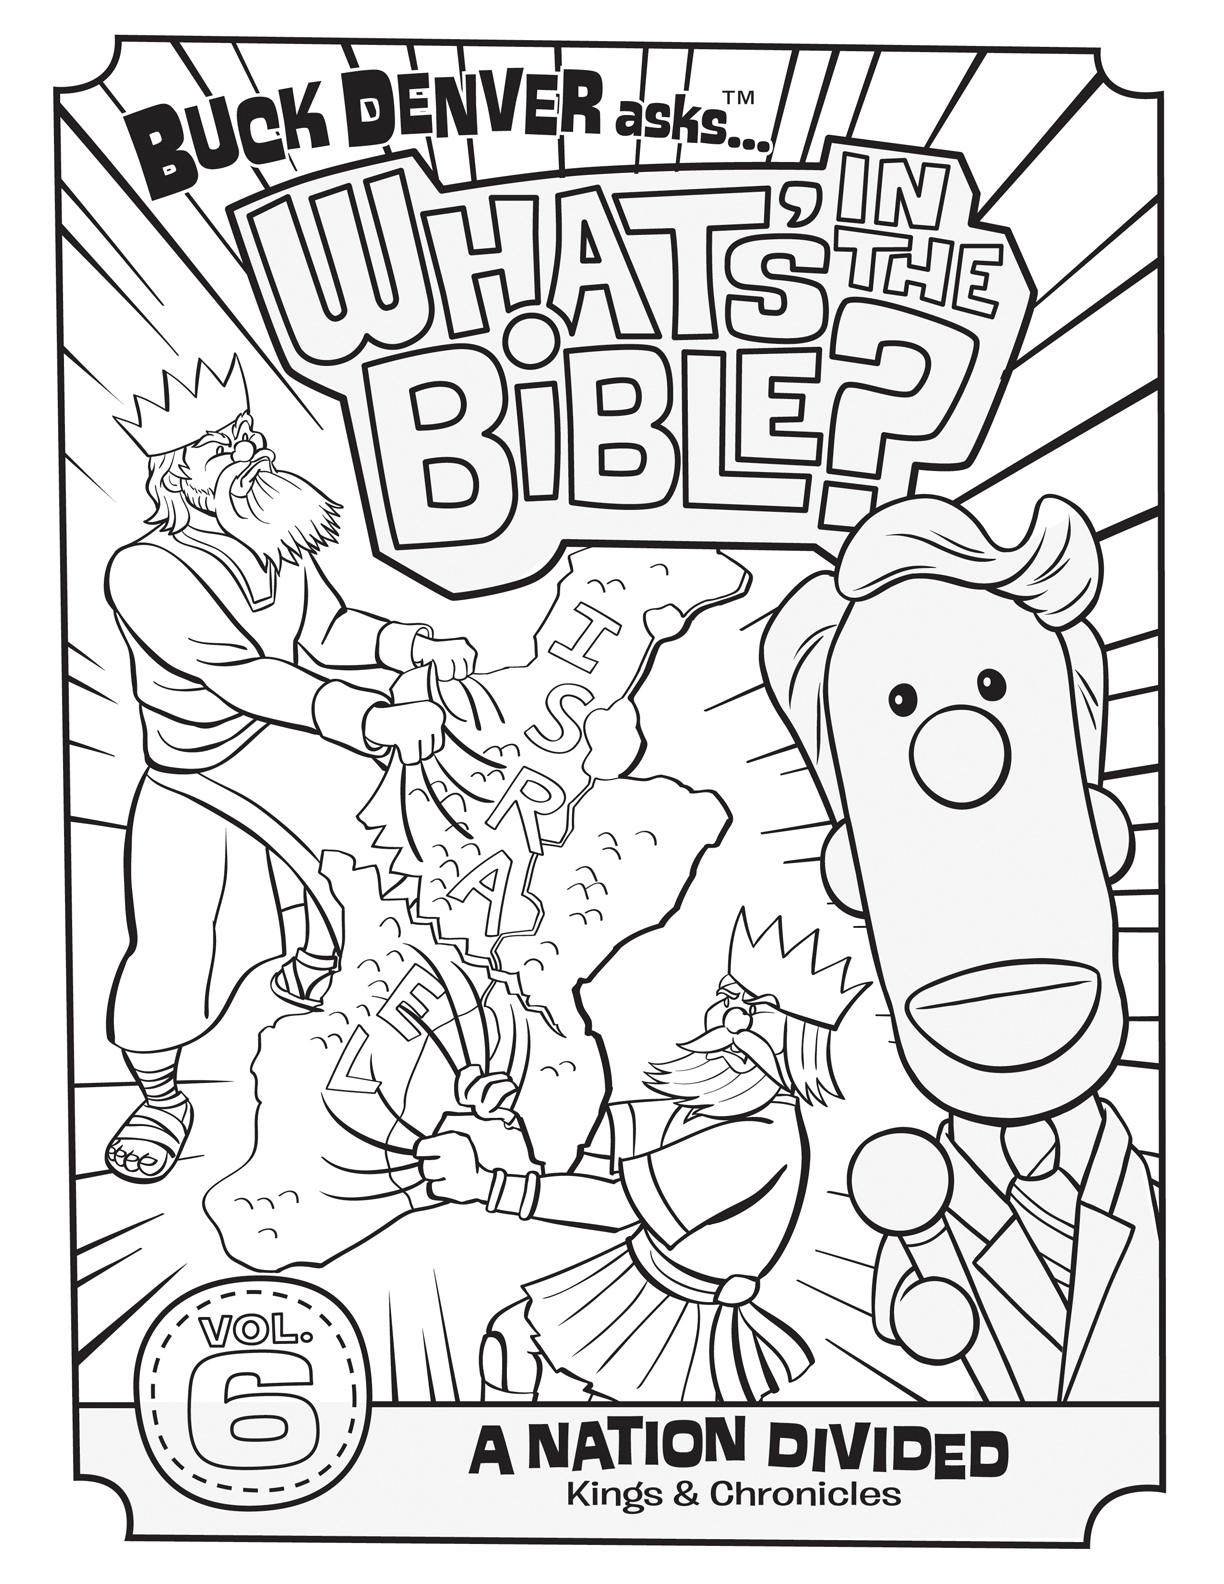 Coloring Page DVD 6 Whats in the Bible